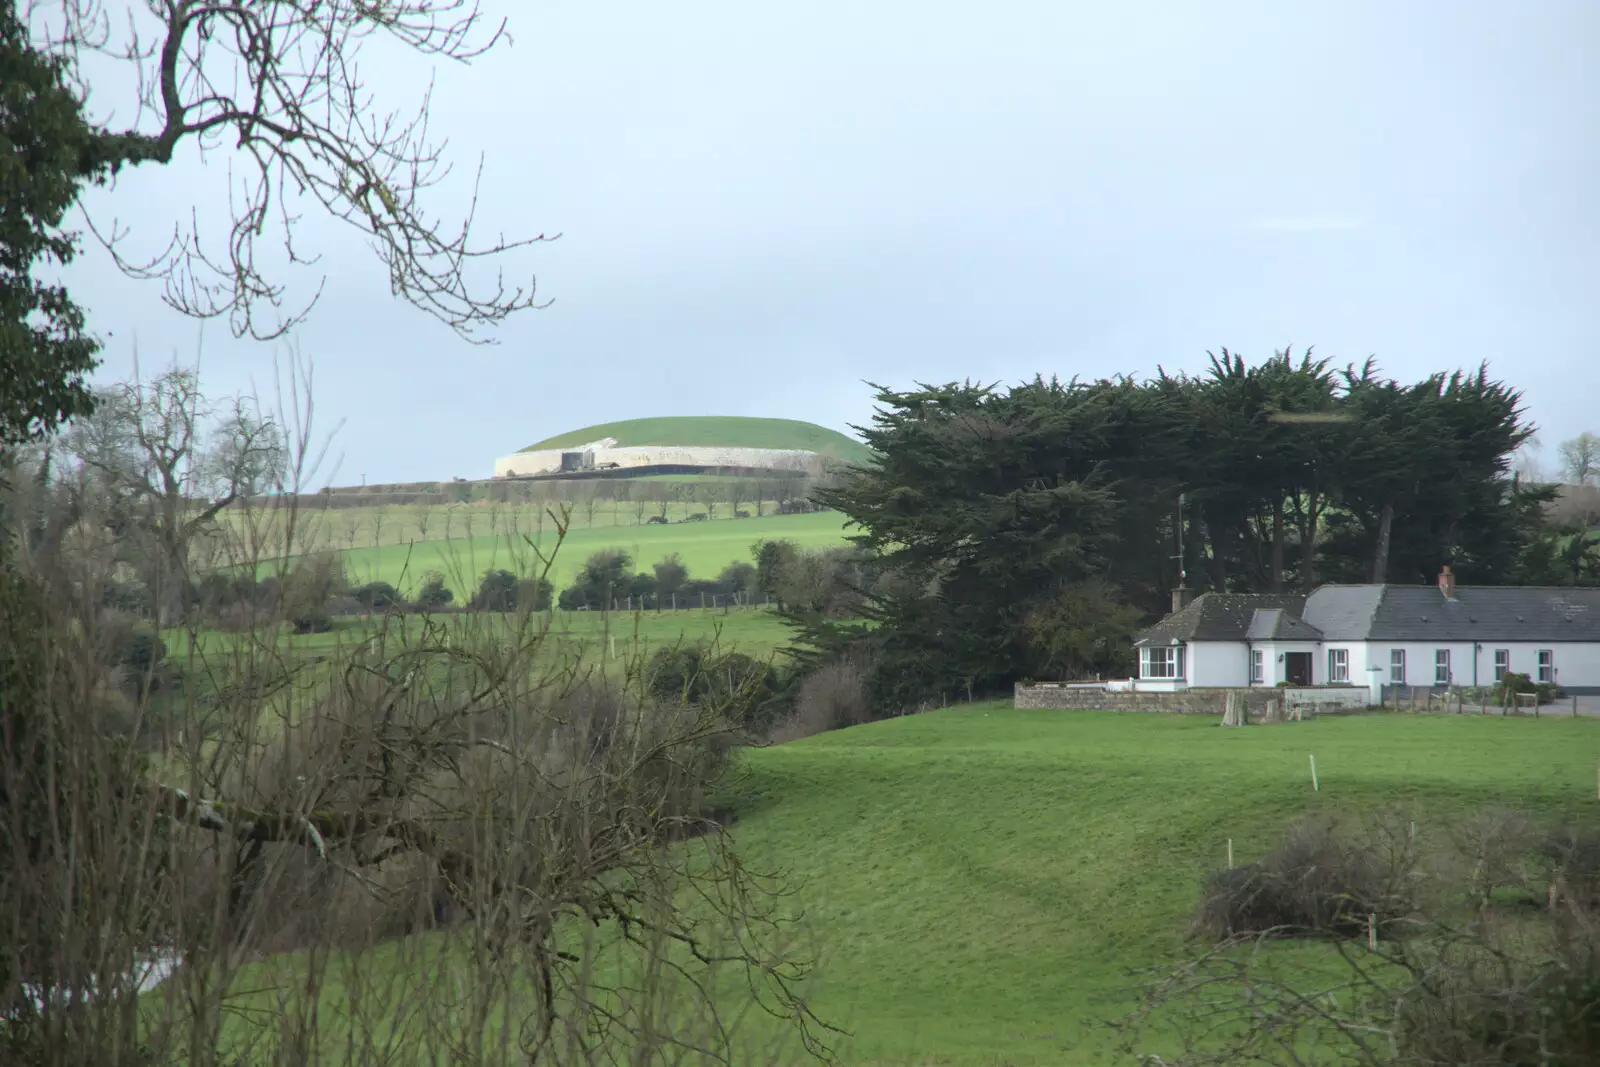 A distant view of Newgrange tumulus, from Blackrock North and Newgrange, County Louth, Ireland - 16th February 2023